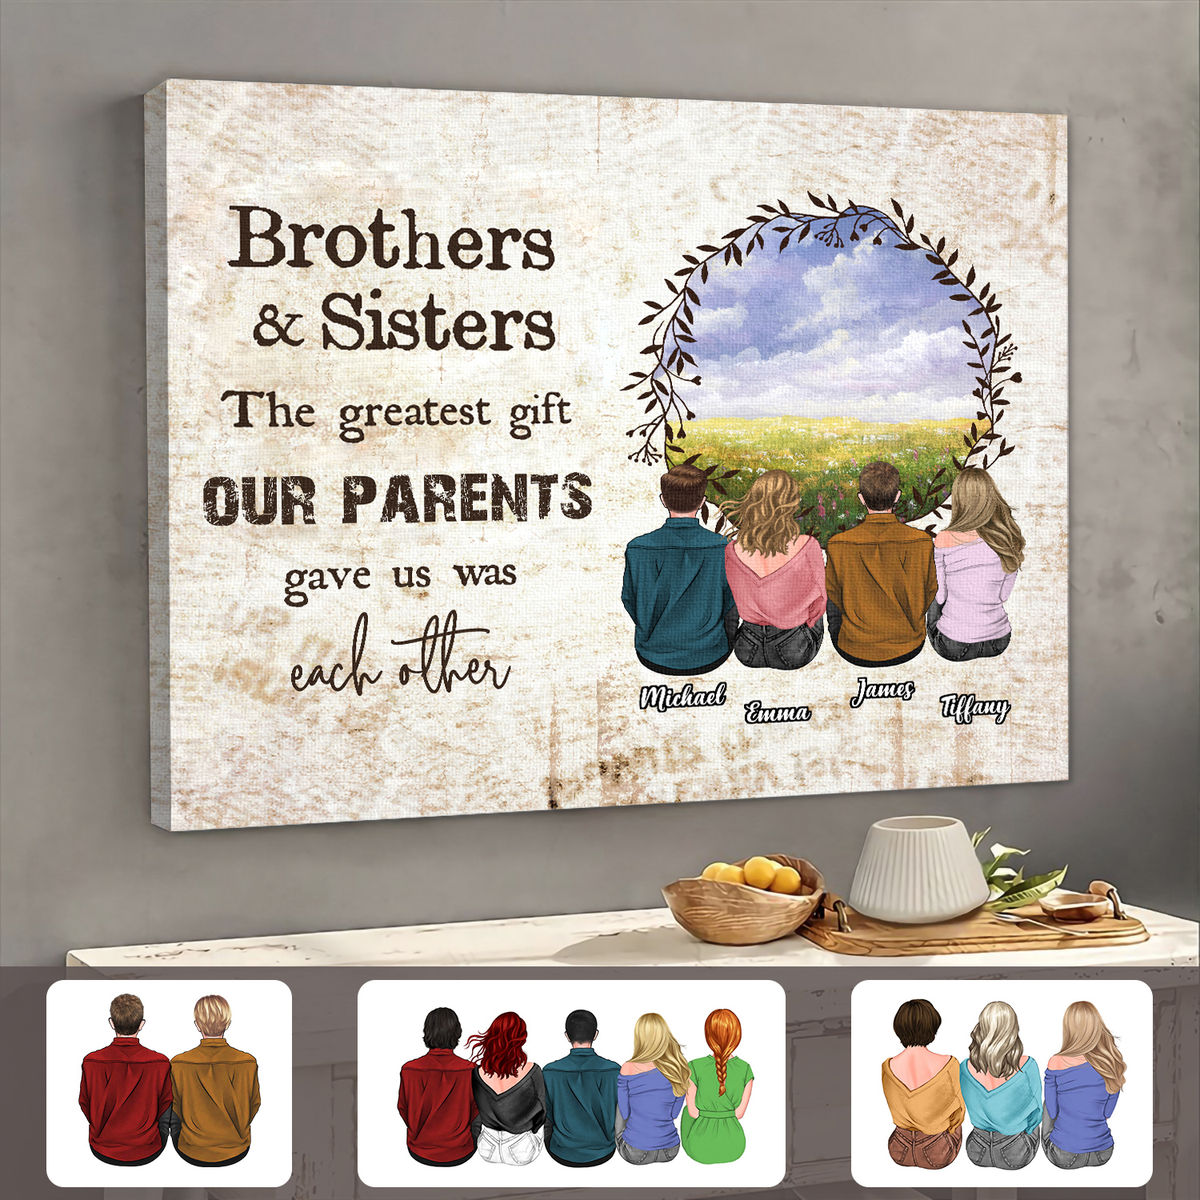 Brothers & Sisters Canvas - The greatest gift our parents gave us was each other